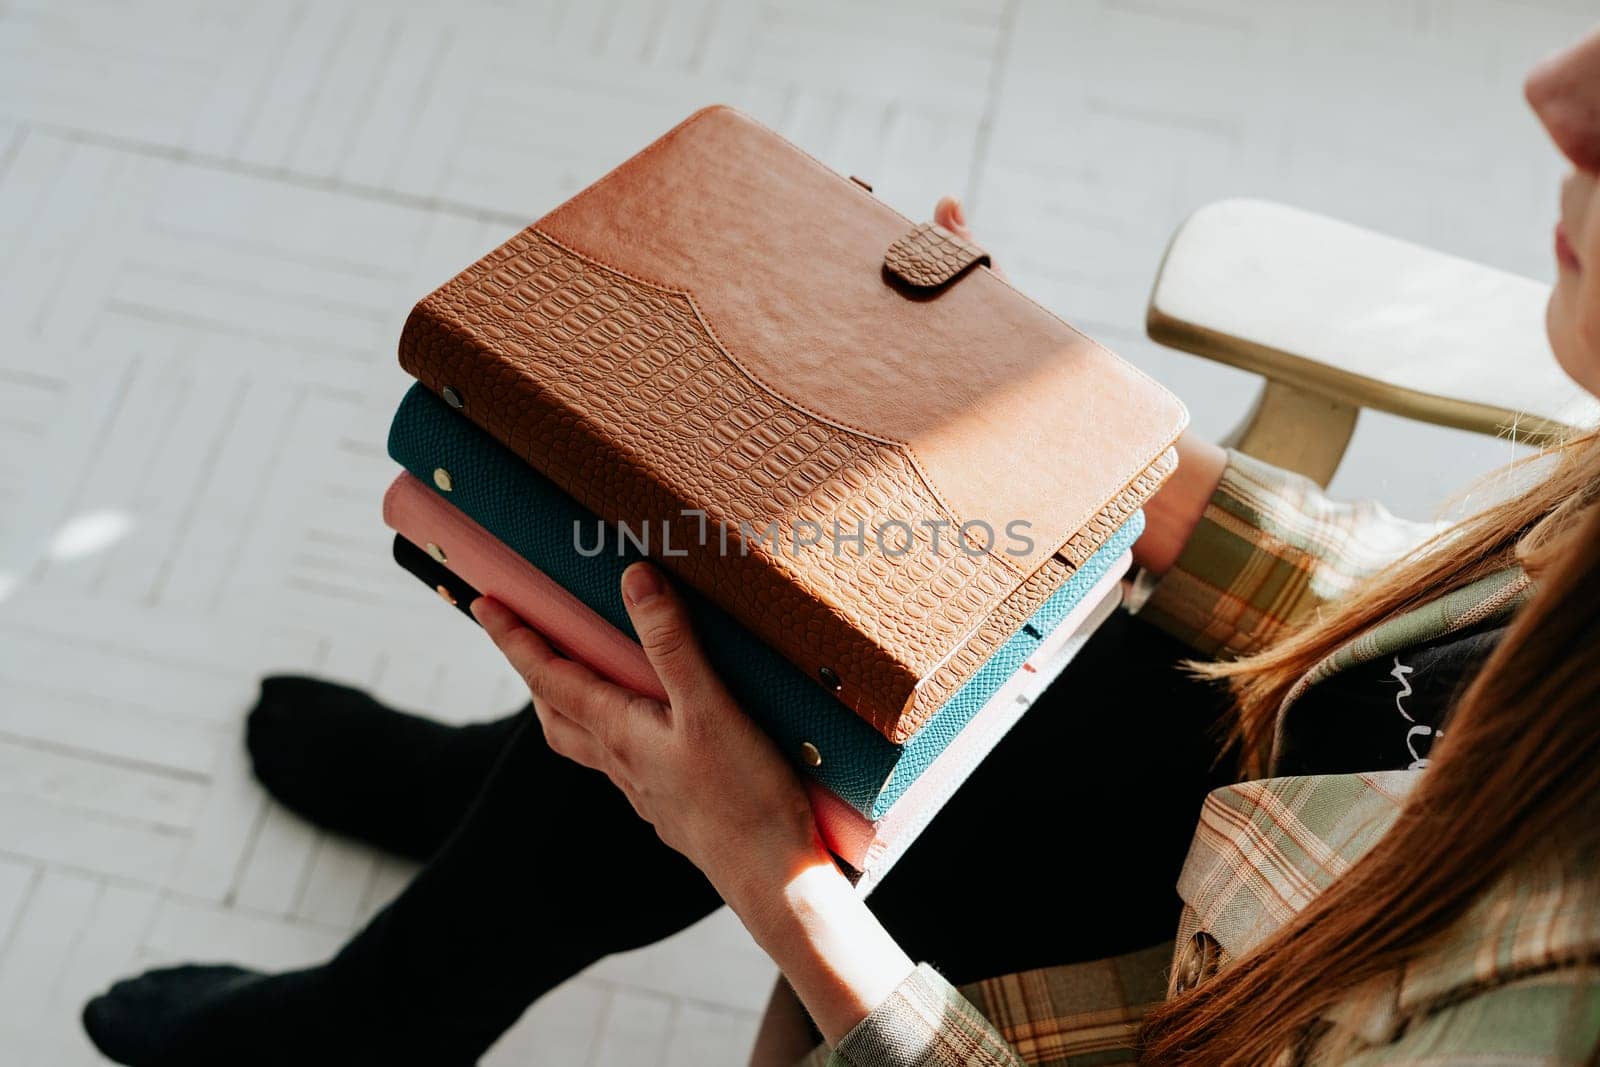 Cropped picture of young woman's hands holding stack of notebooks. Girl holds a pile of notepads books while sitting on a wooden chair. Blank space mockup books.